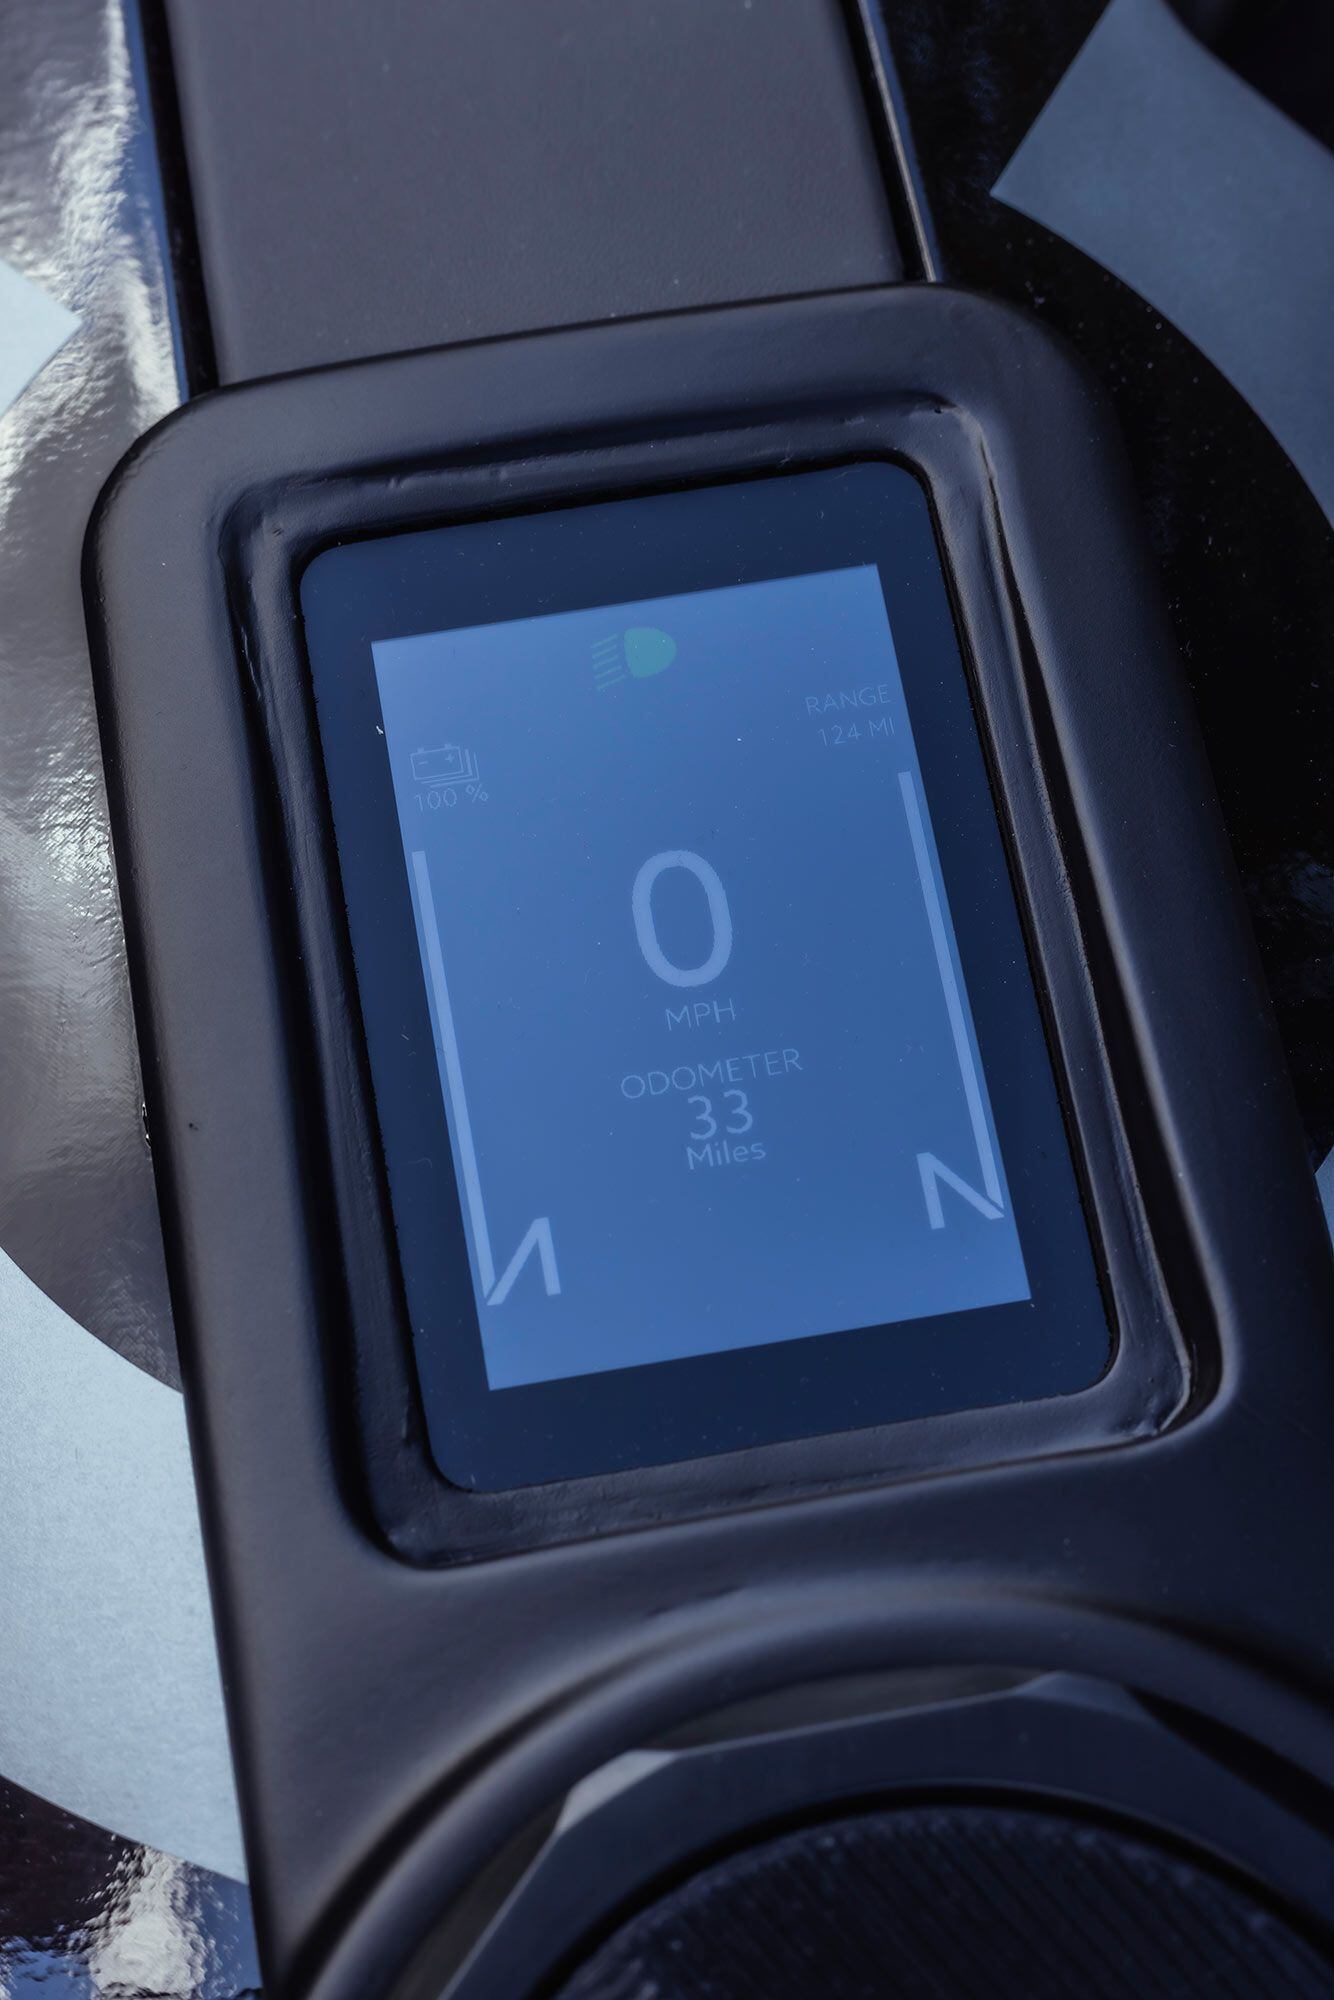 A digital dash reports the battery charge, range, speed, and riding modes. It is difficult to read in direct sunlight.